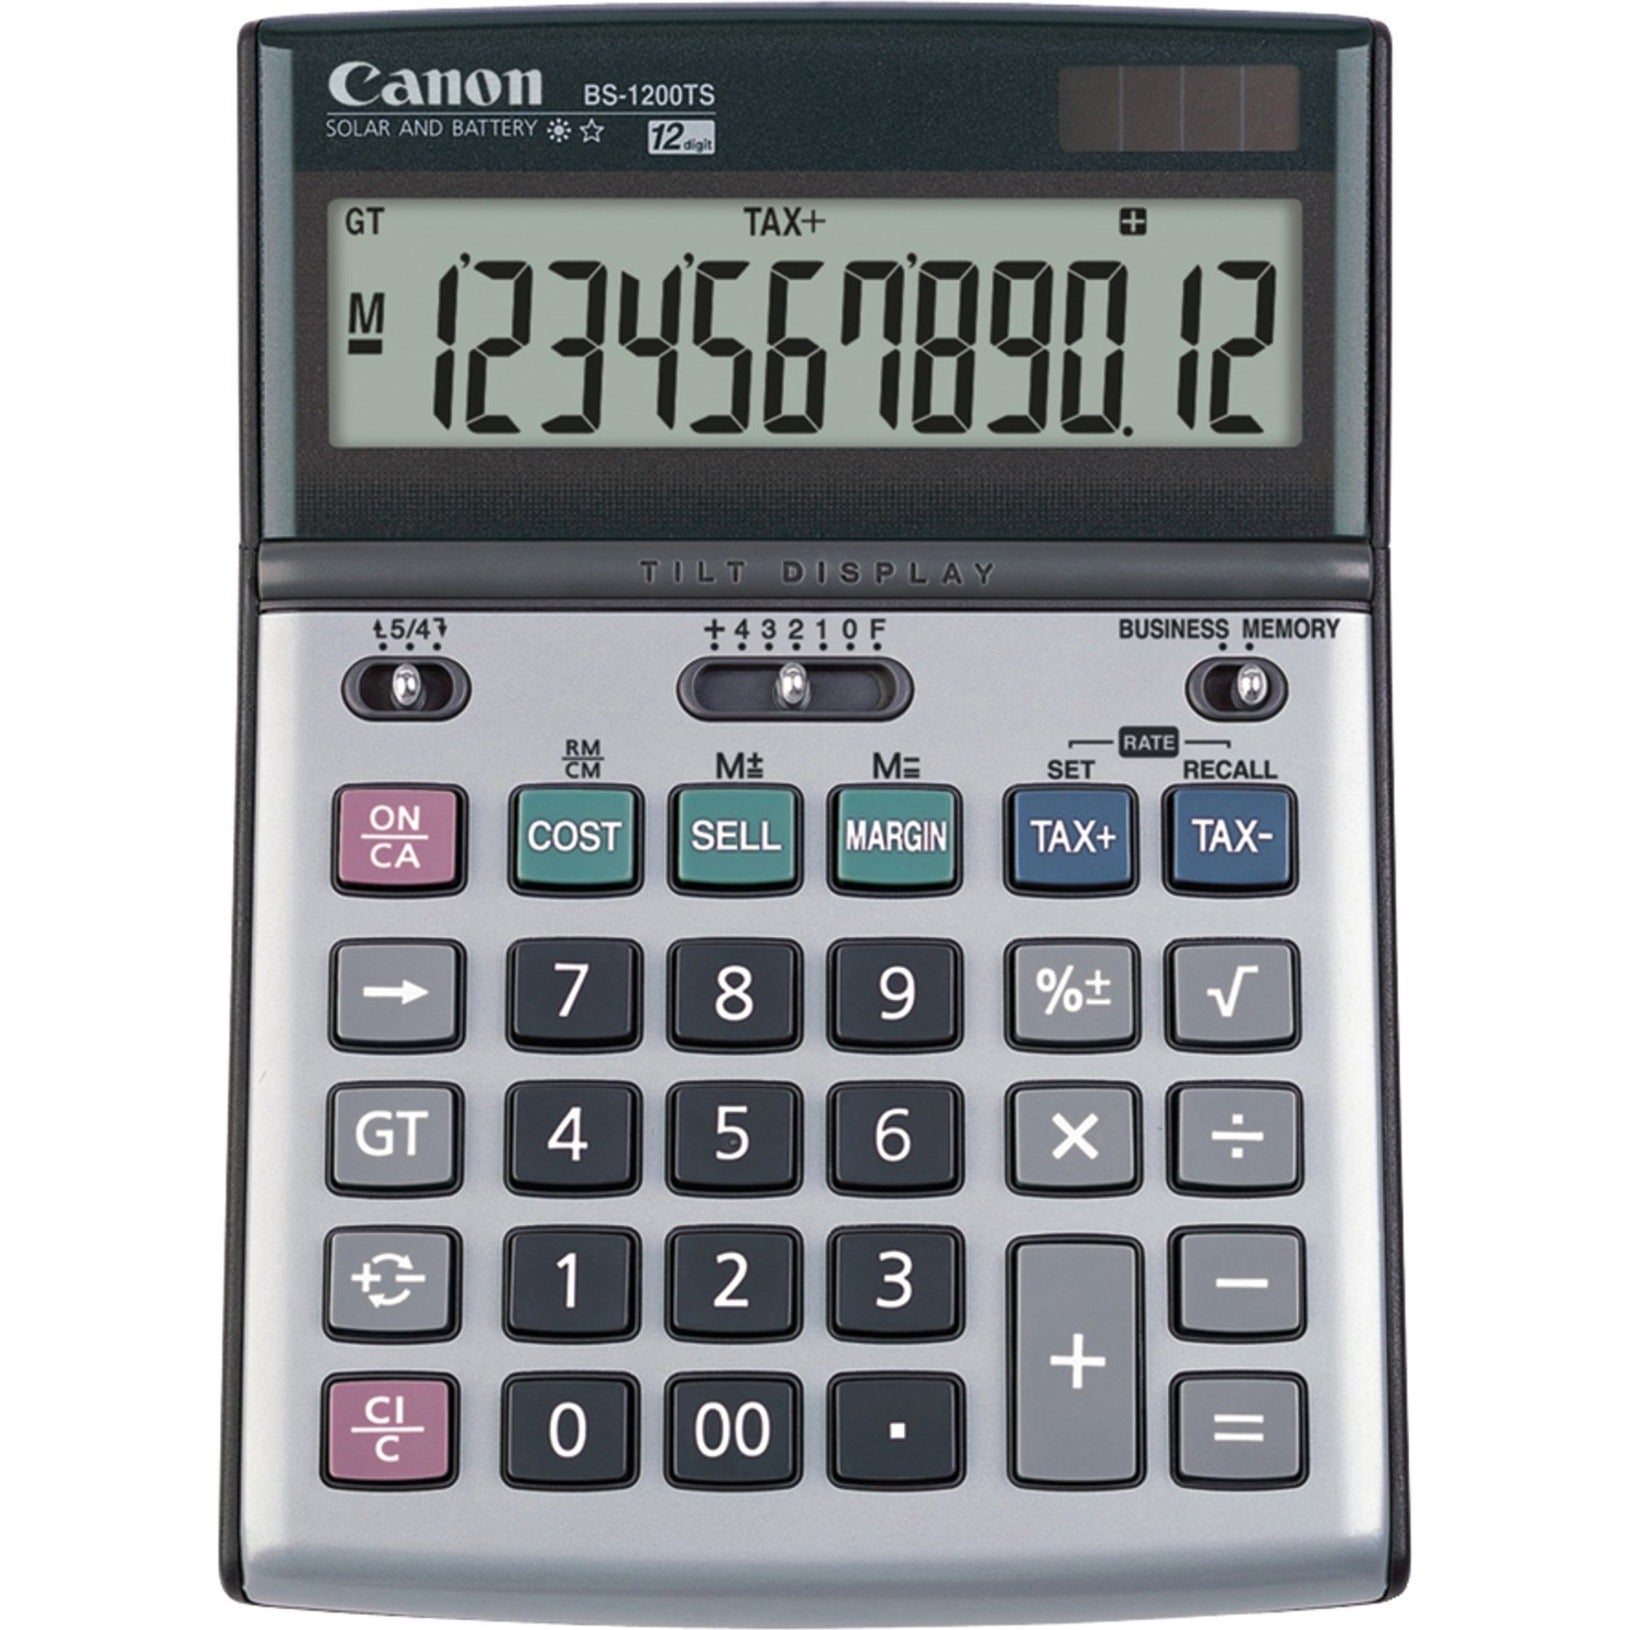 Canon 8507A010 BS-1200TS Portable Display, Simple Calculator with Tilt Display, Adjustable Display, and More